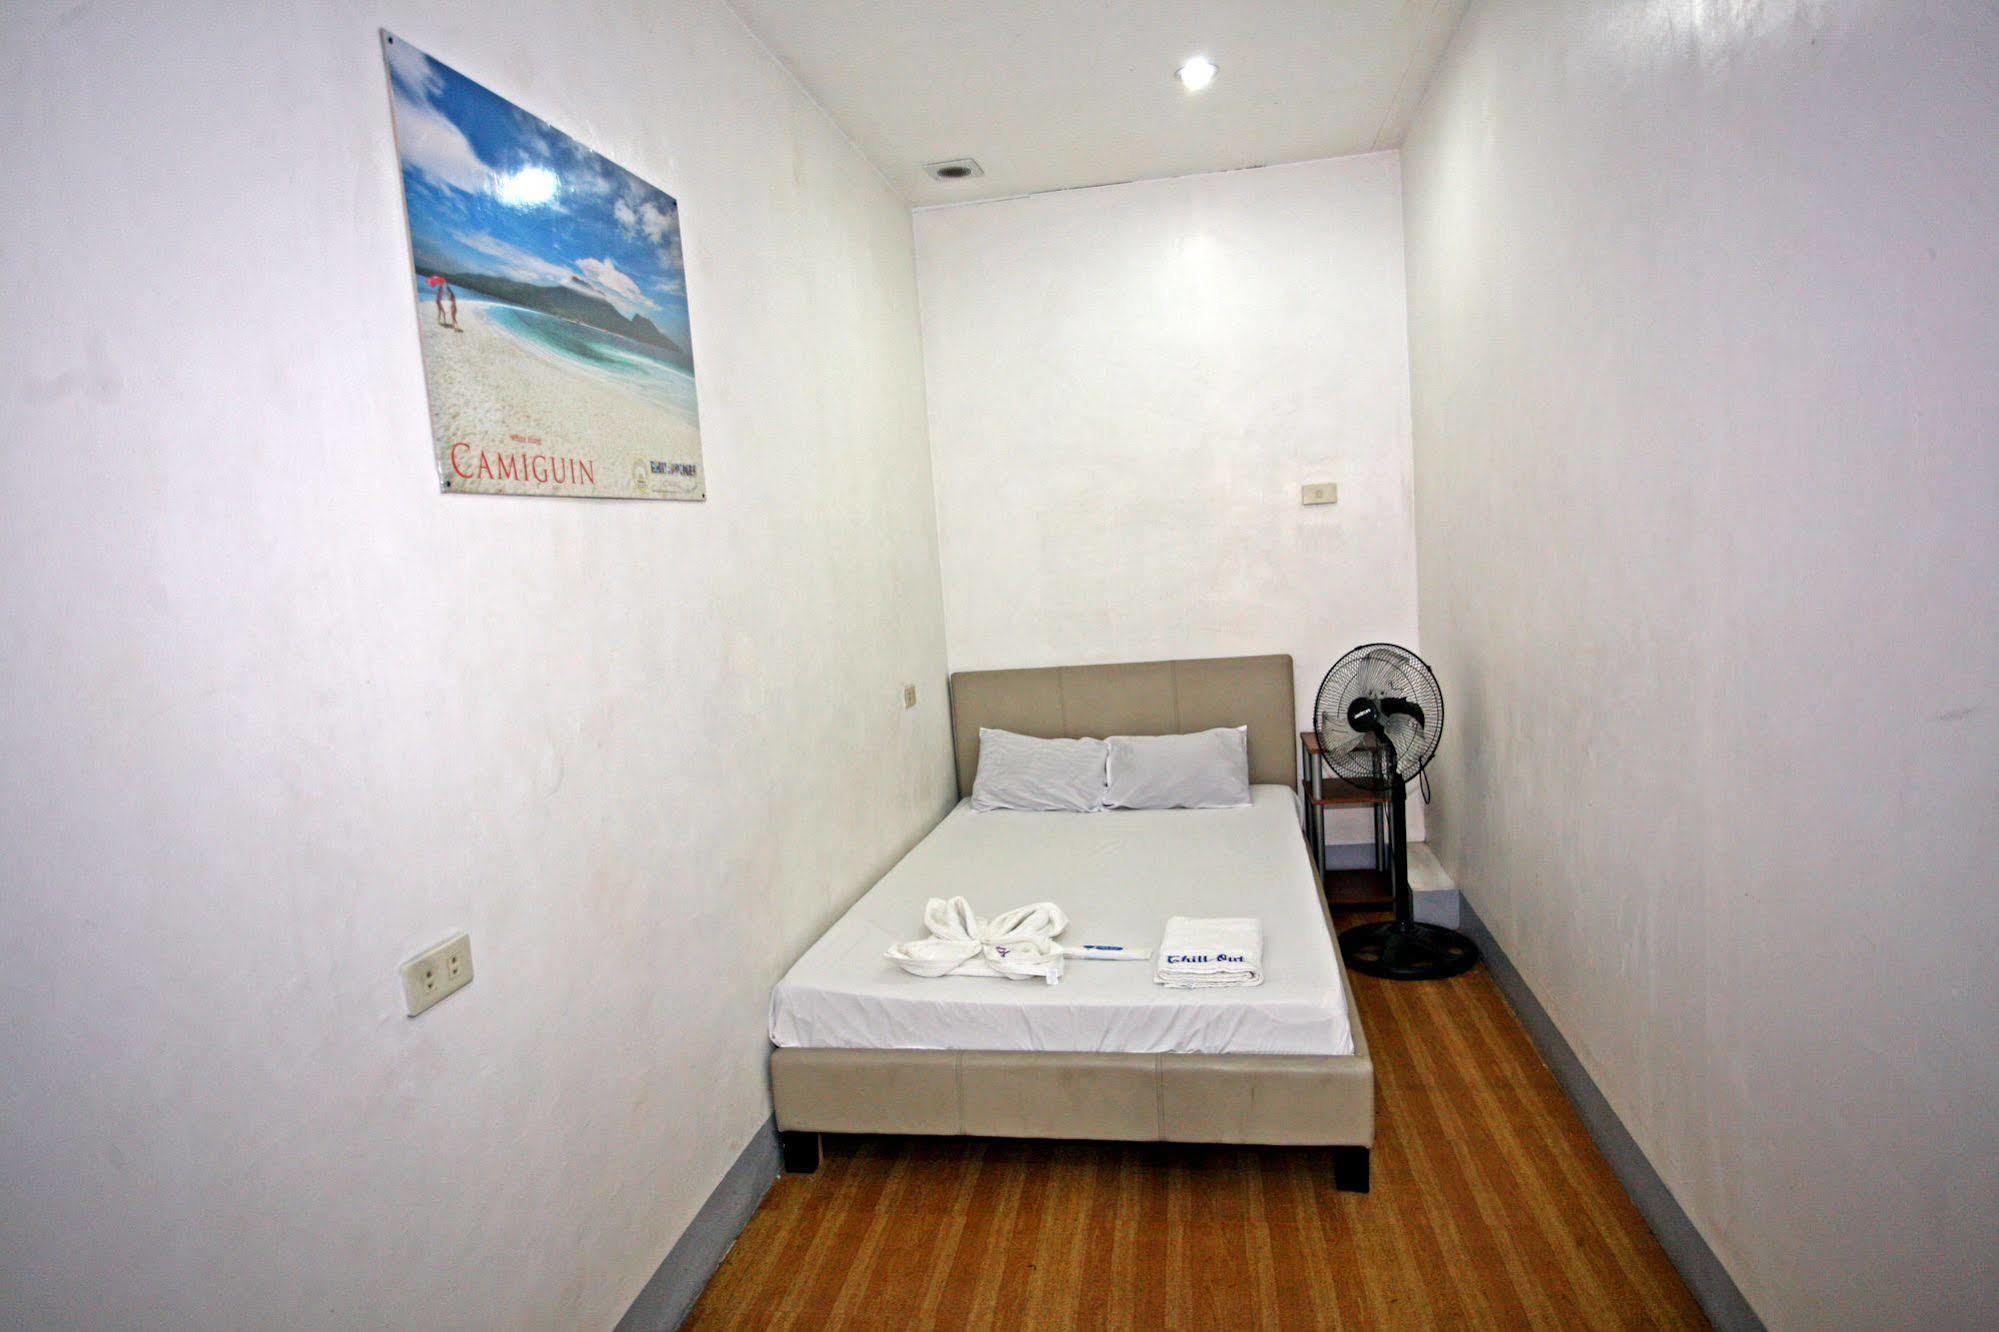 Chill-Out Guesthouse Manila Exterior photo